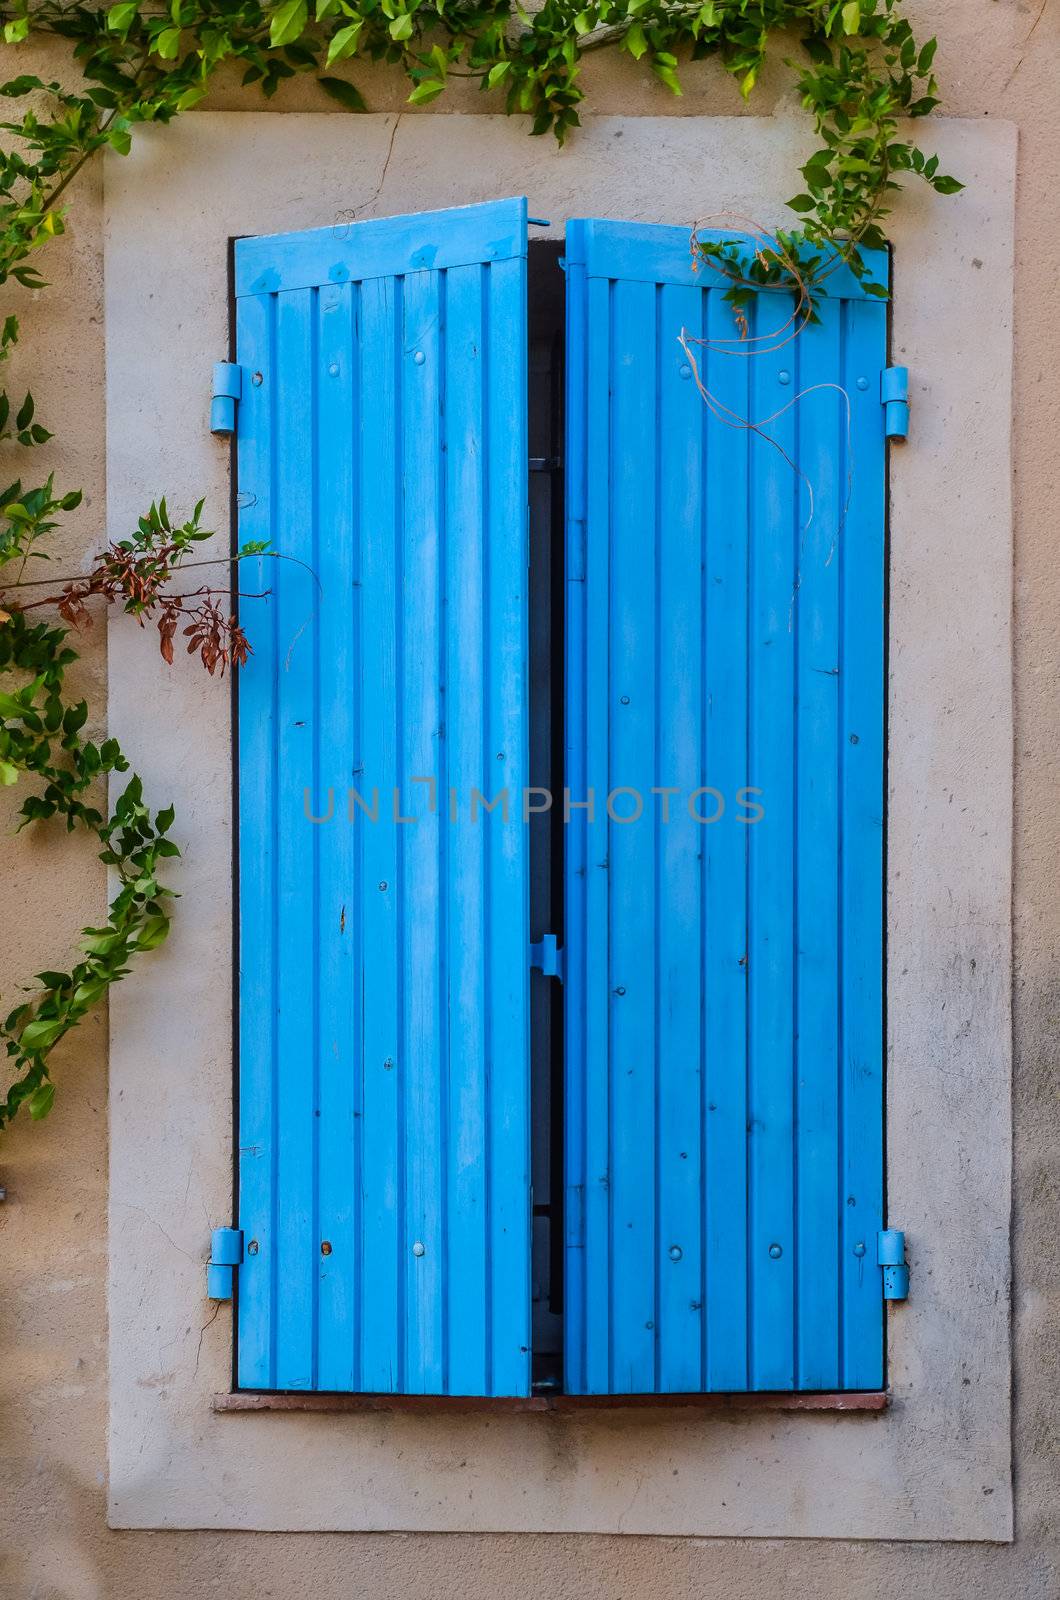 Blue closed window in the wall with green plants